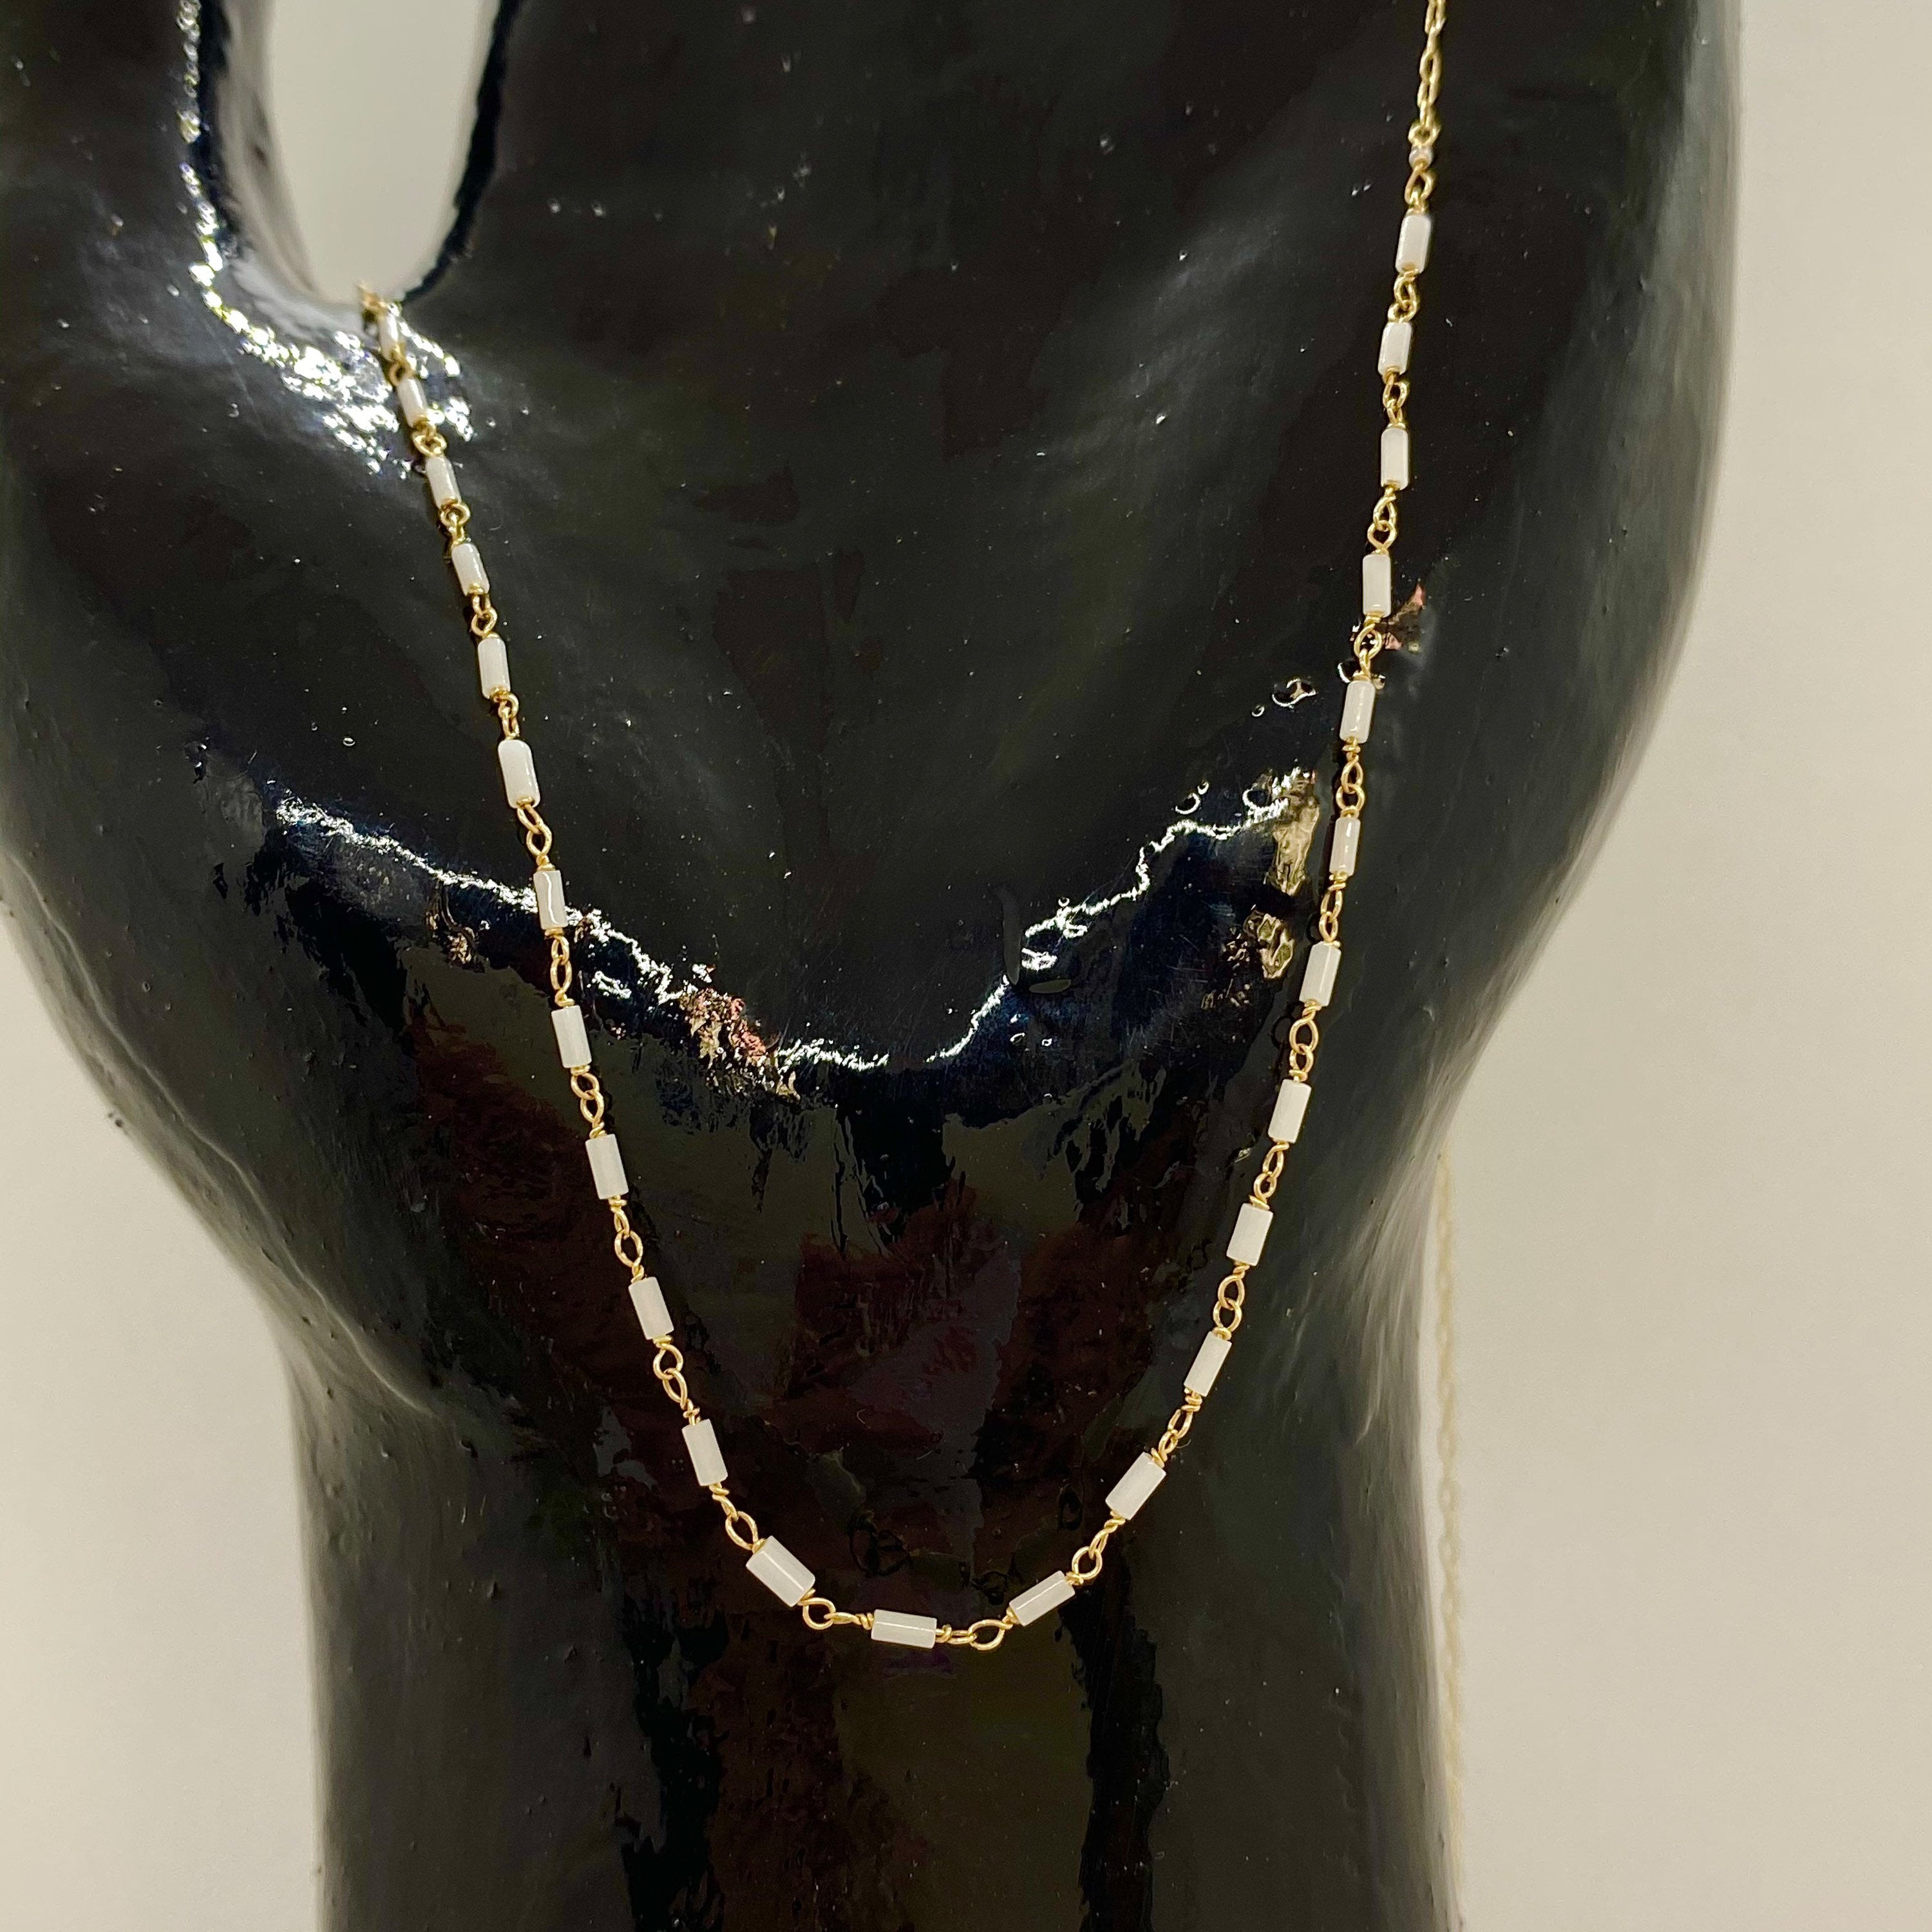 14kt Gold Chain Necklace w/ Antique Italian Beads & Freshwater Pearls